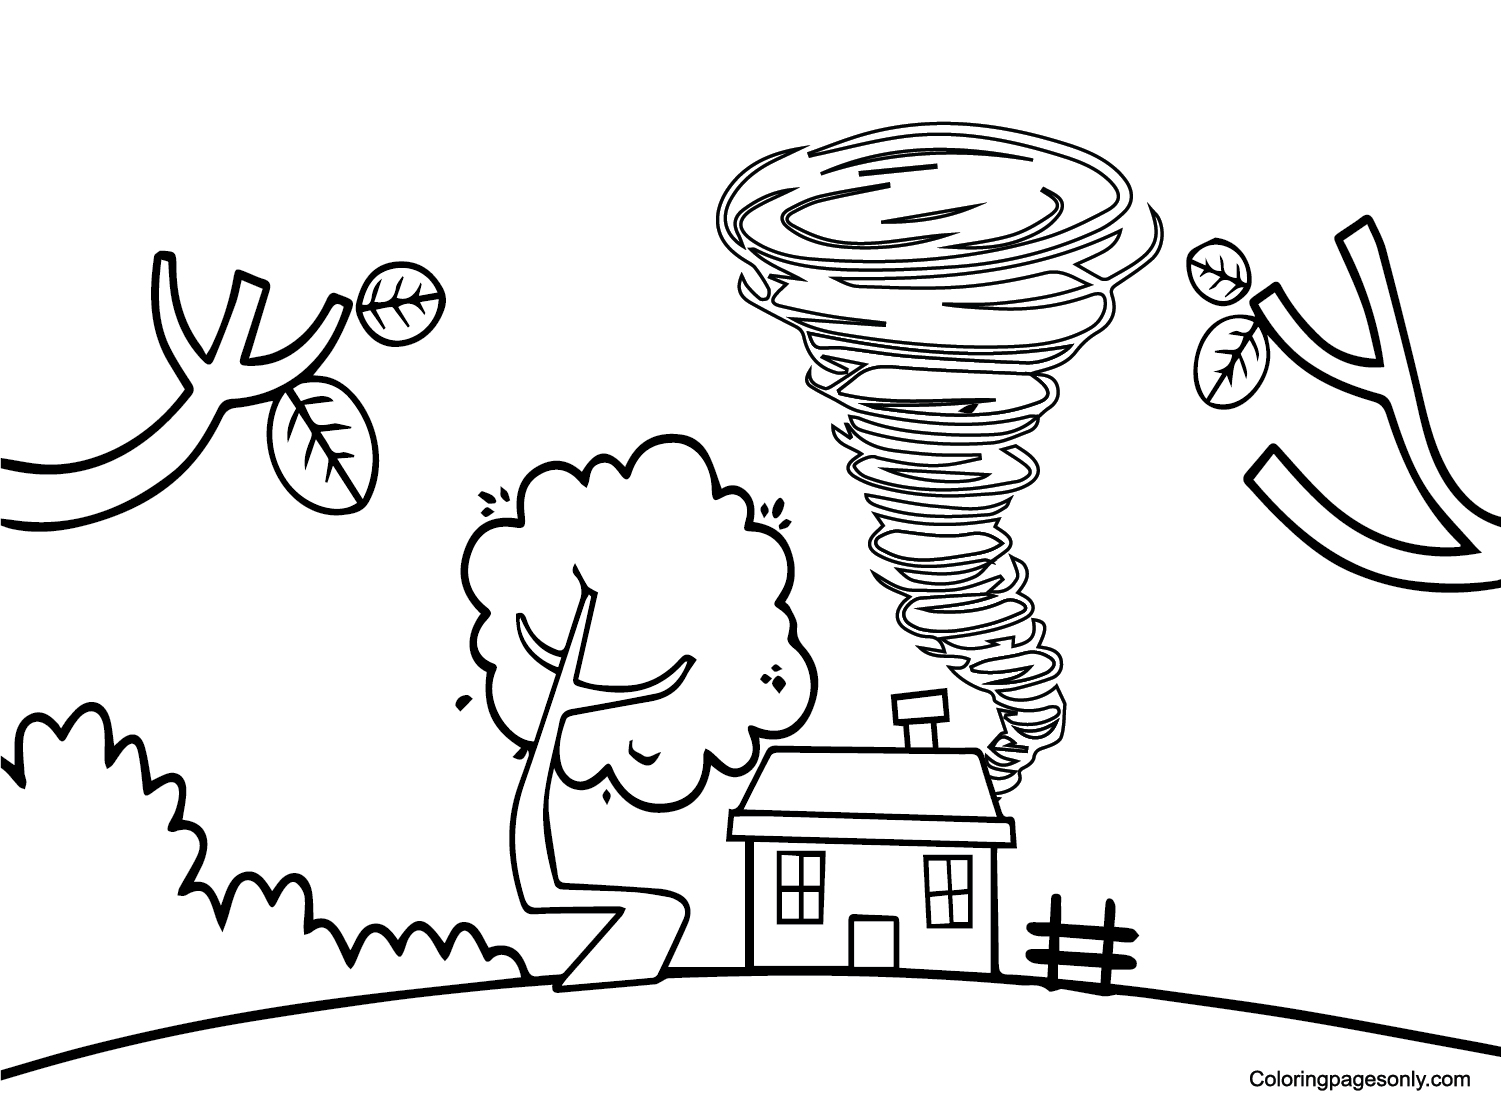 Tornado Coloring Page To Download And Print For Free - vrogue.co